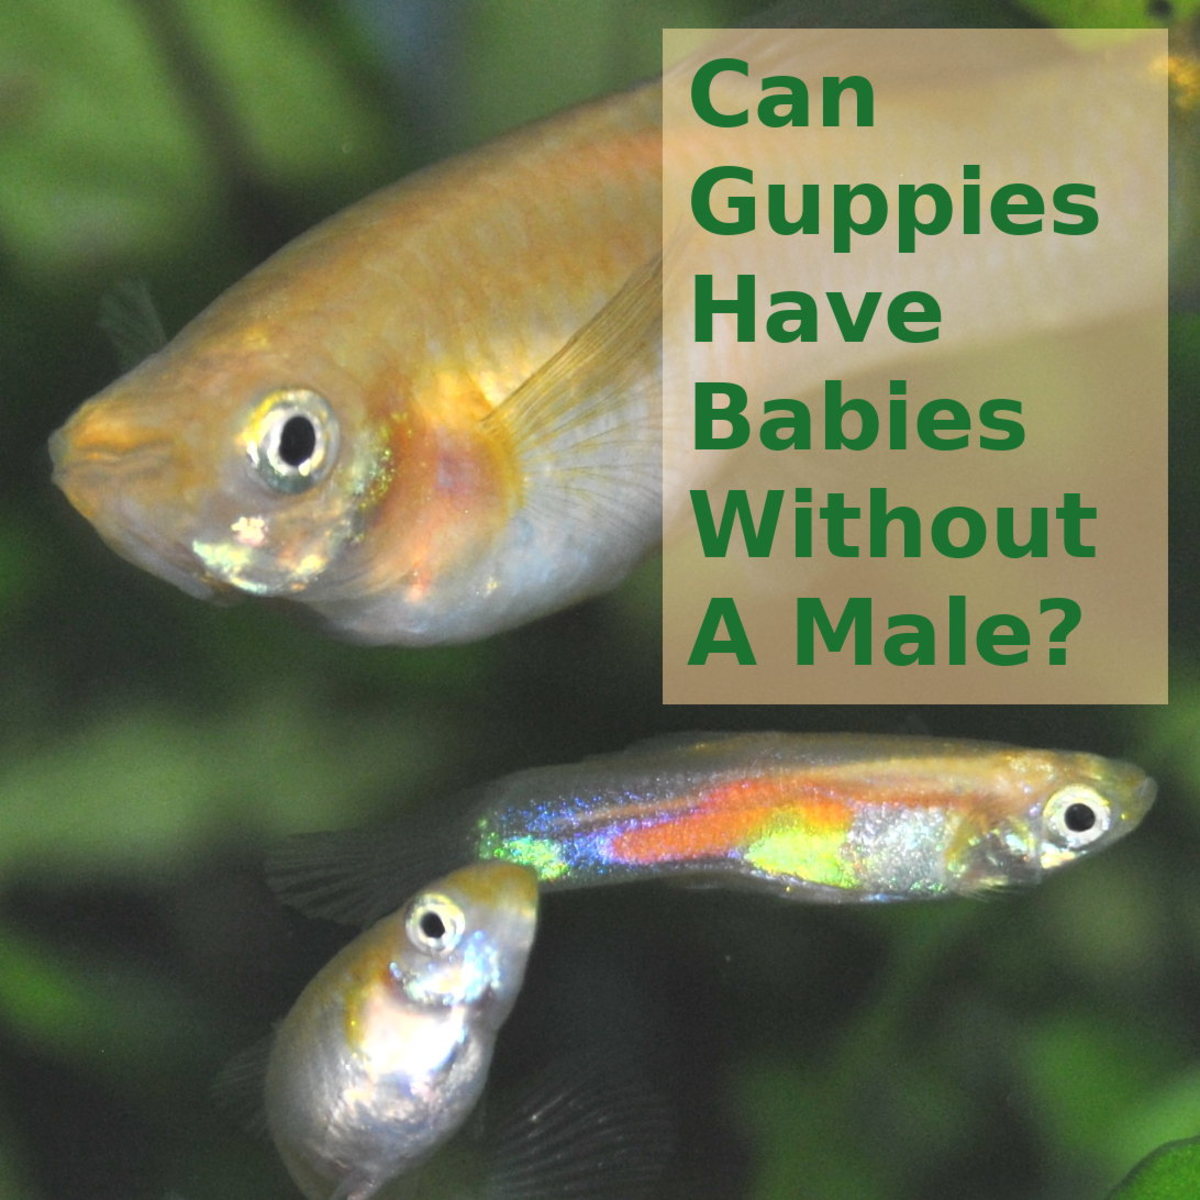 Can Guppies Have Babies Without a Male?